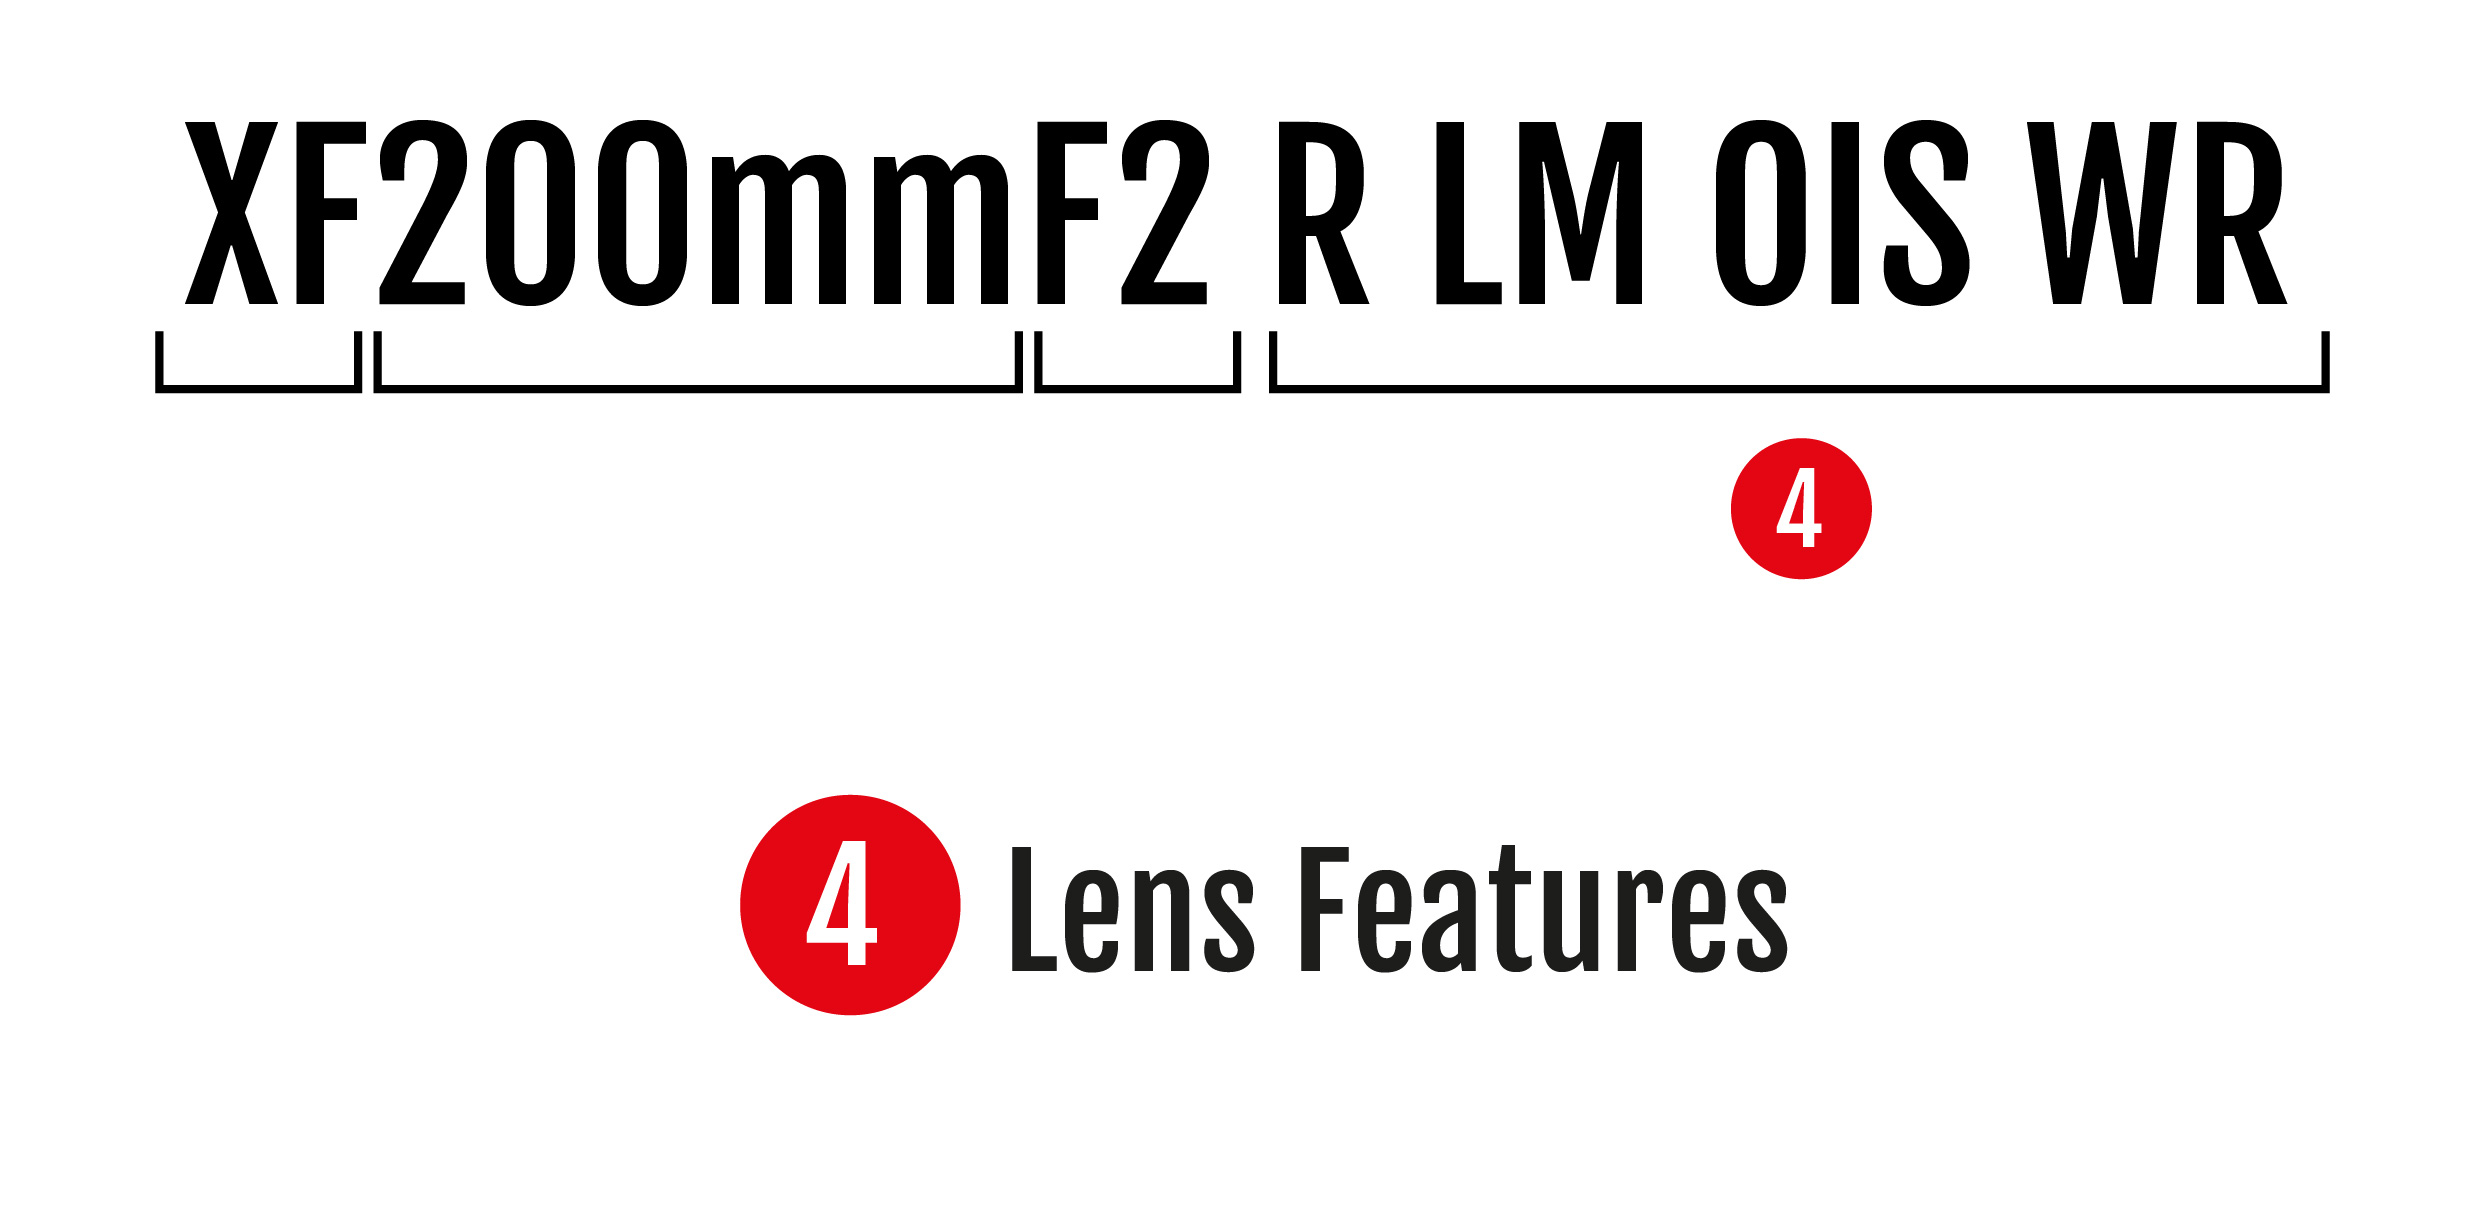 Key explaining the different sections of FUJINON lens names